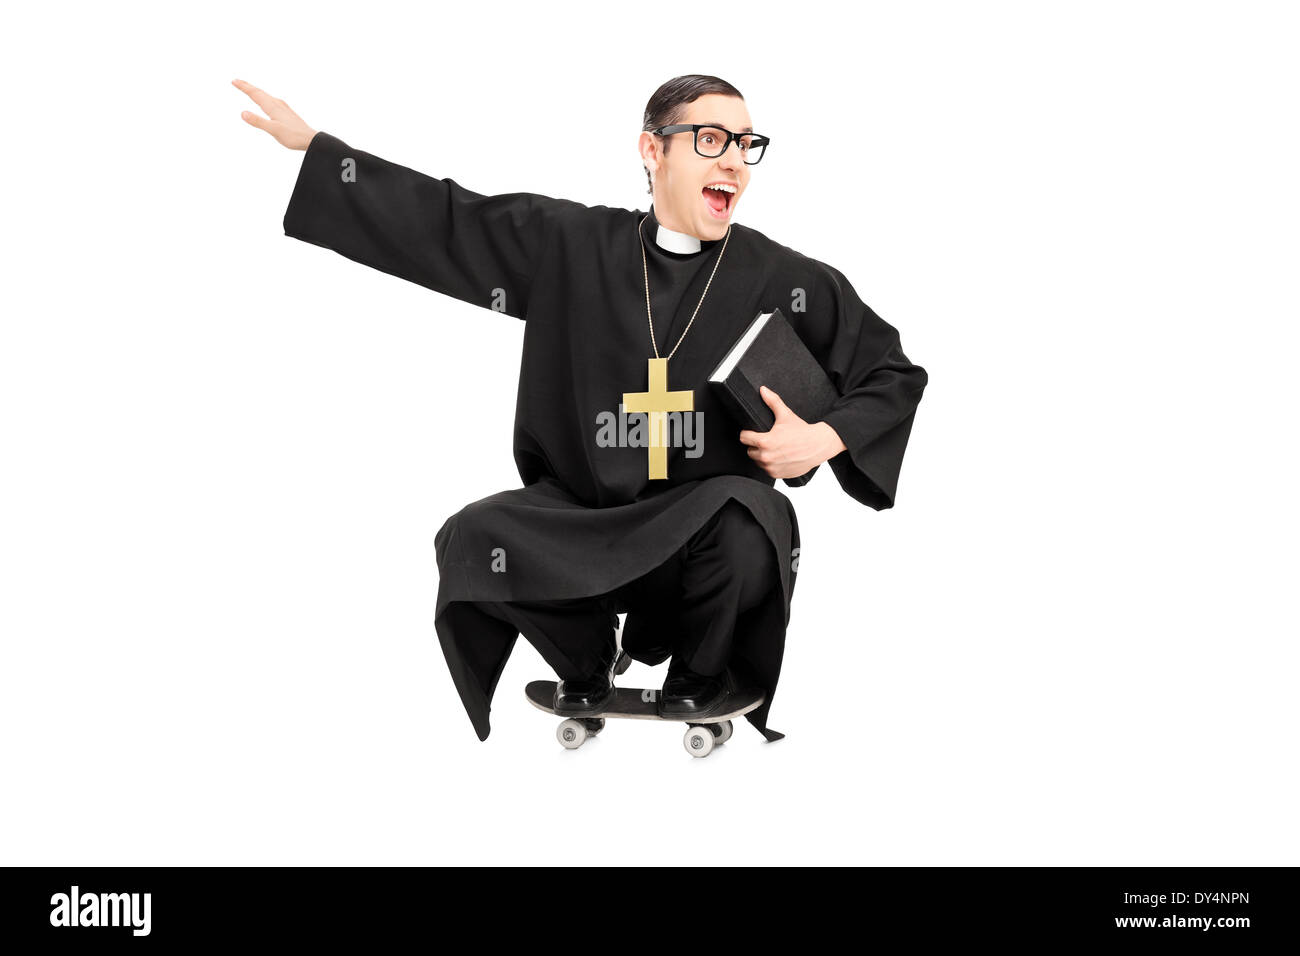 Silly priest riding a small skateboard Stock Photo